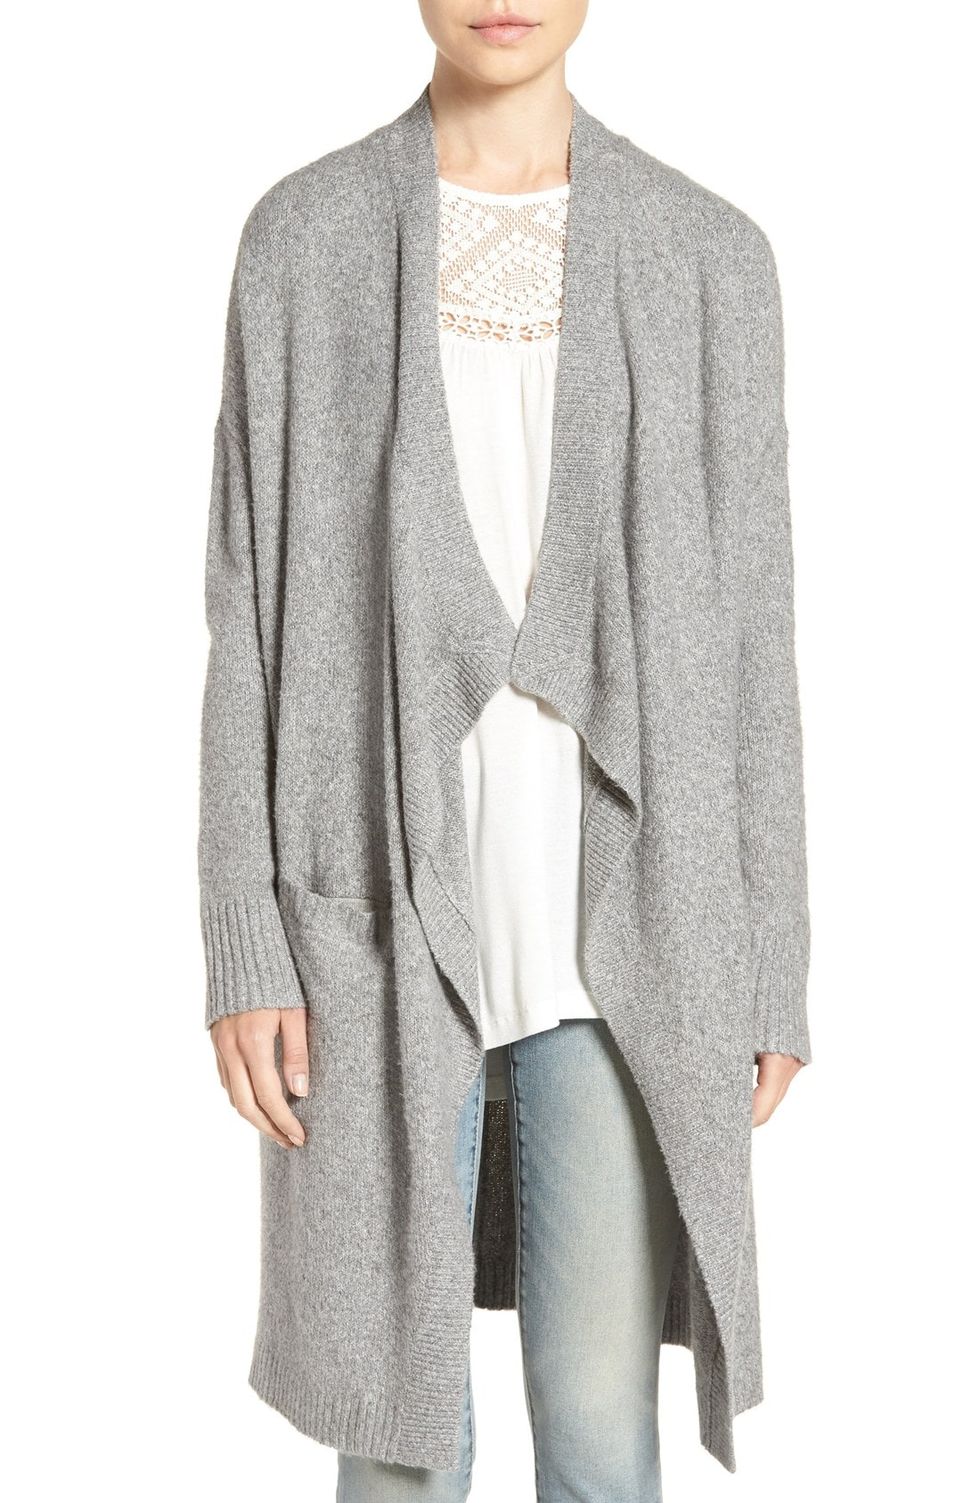 Fall Favorites Are 40 Percent Off At Nordstrom's Fall Sale - Shop ...